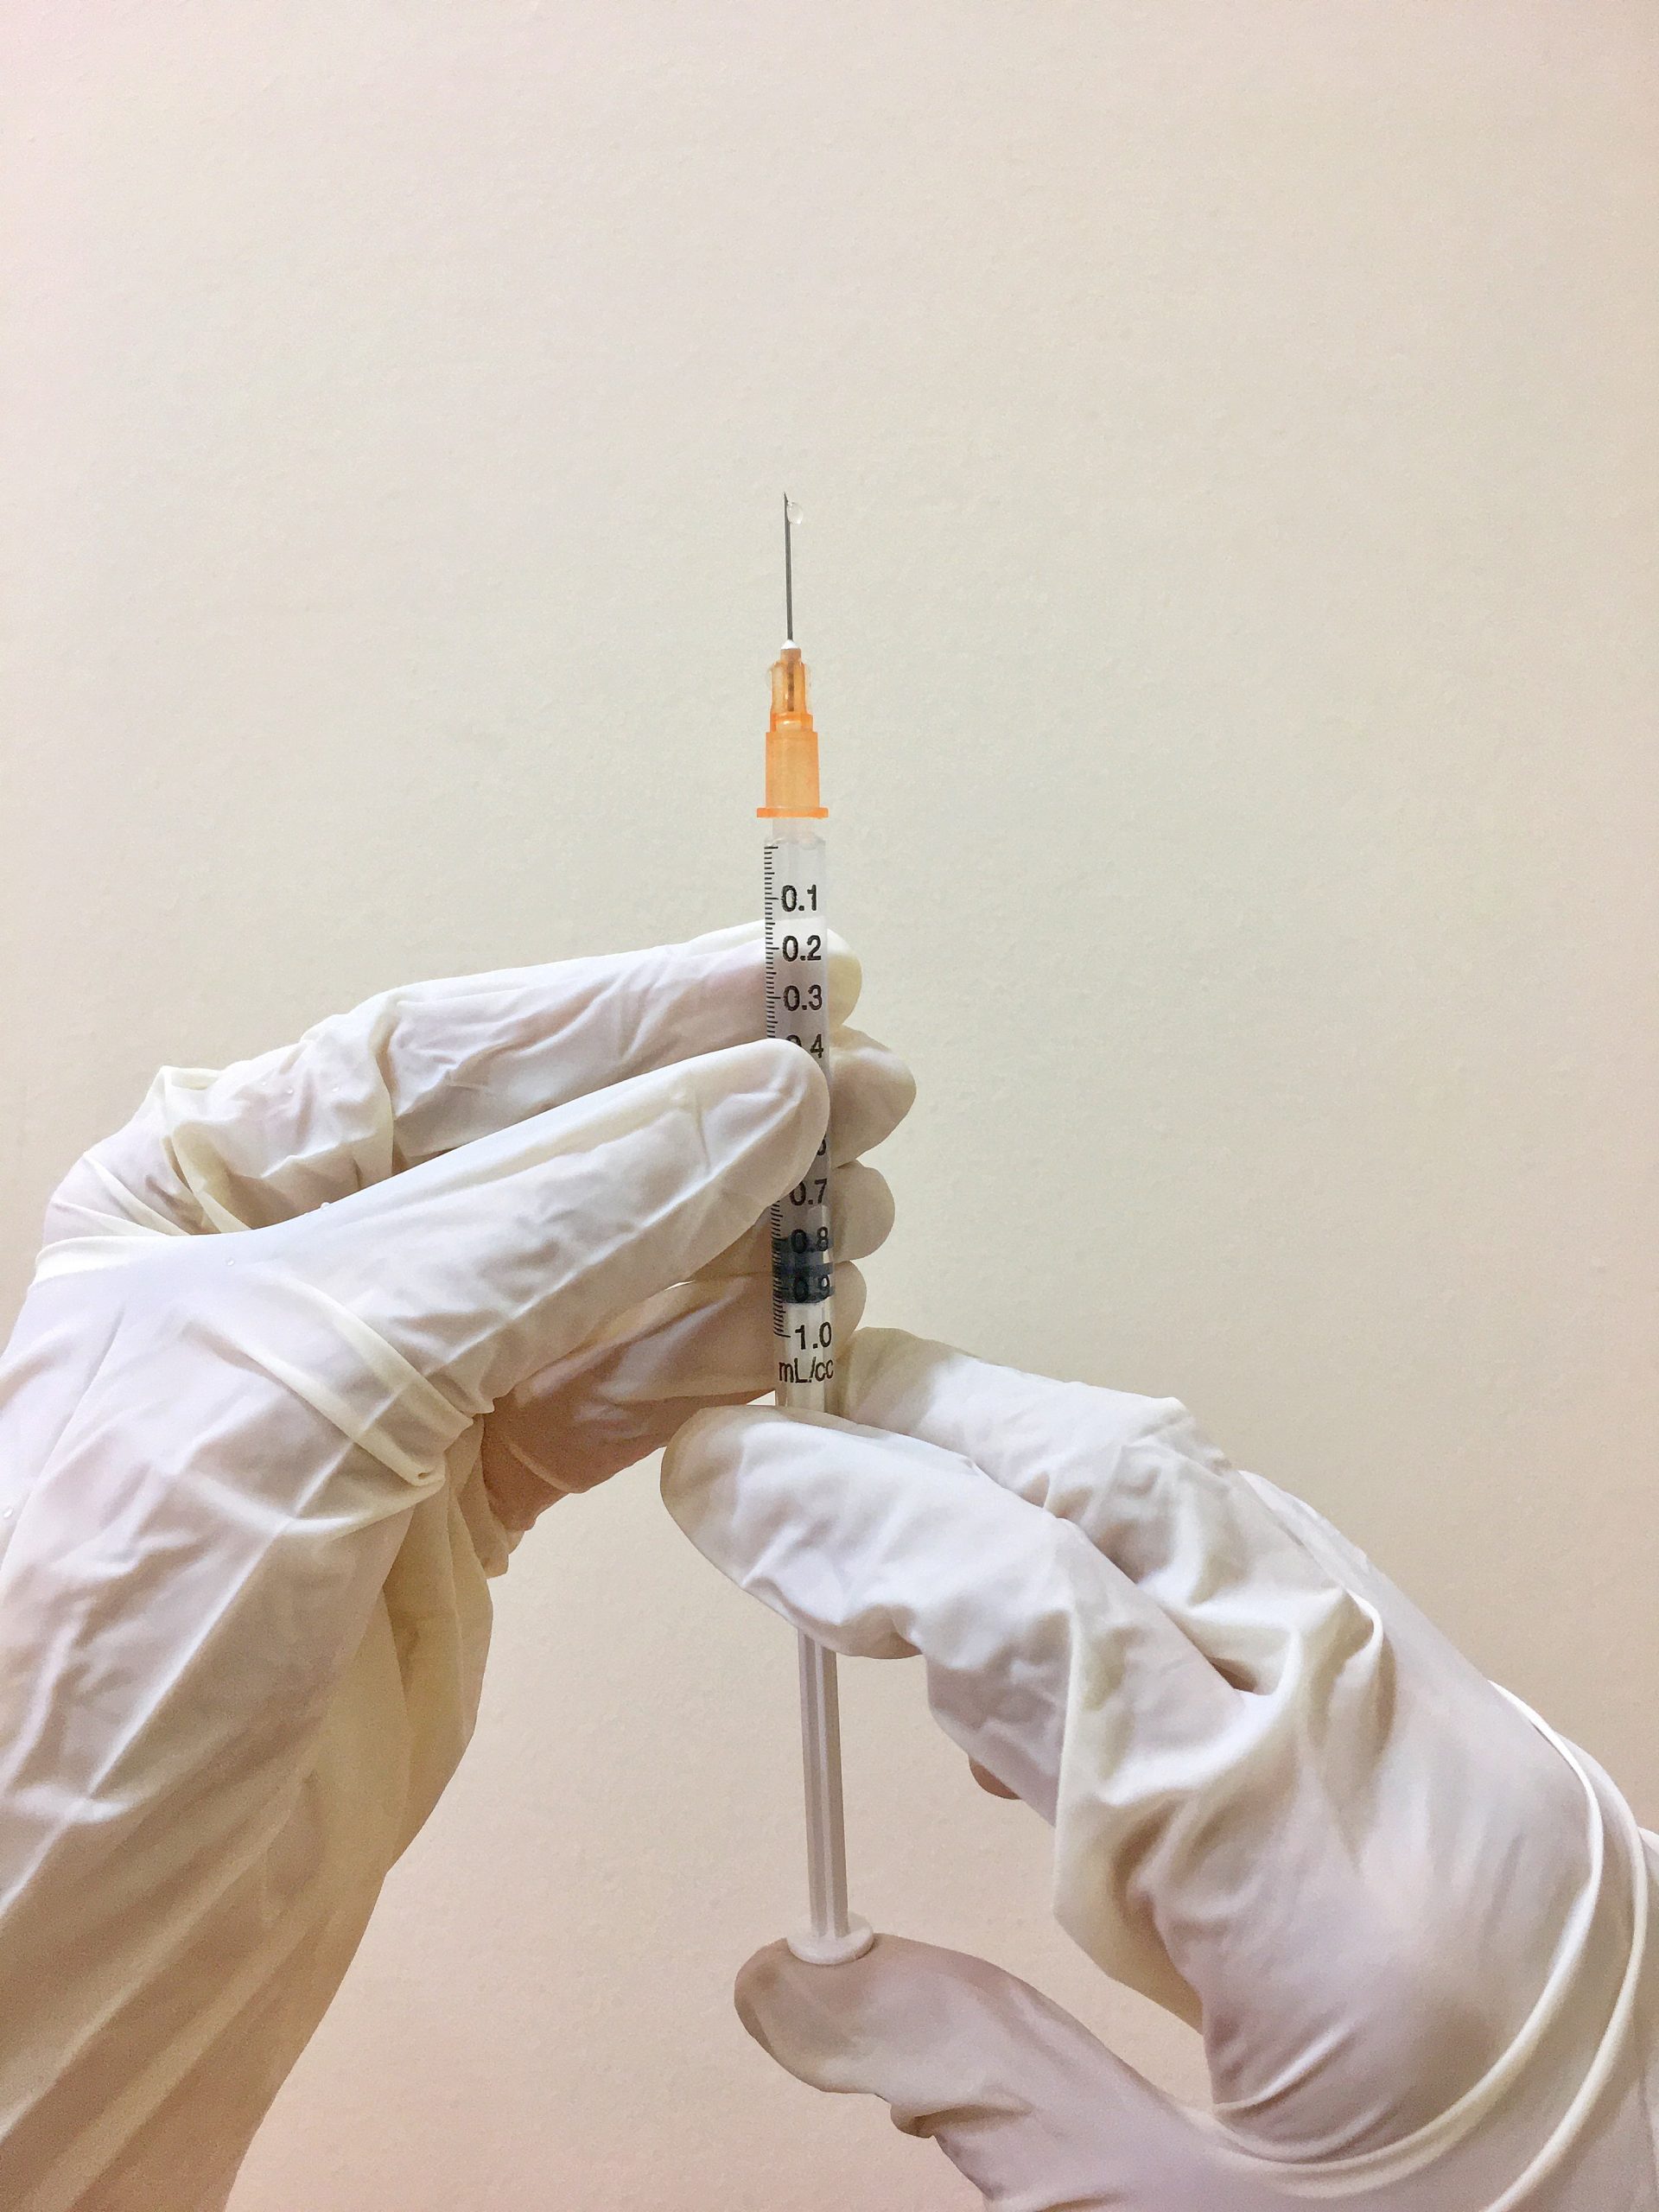 Injections for Pain Relief